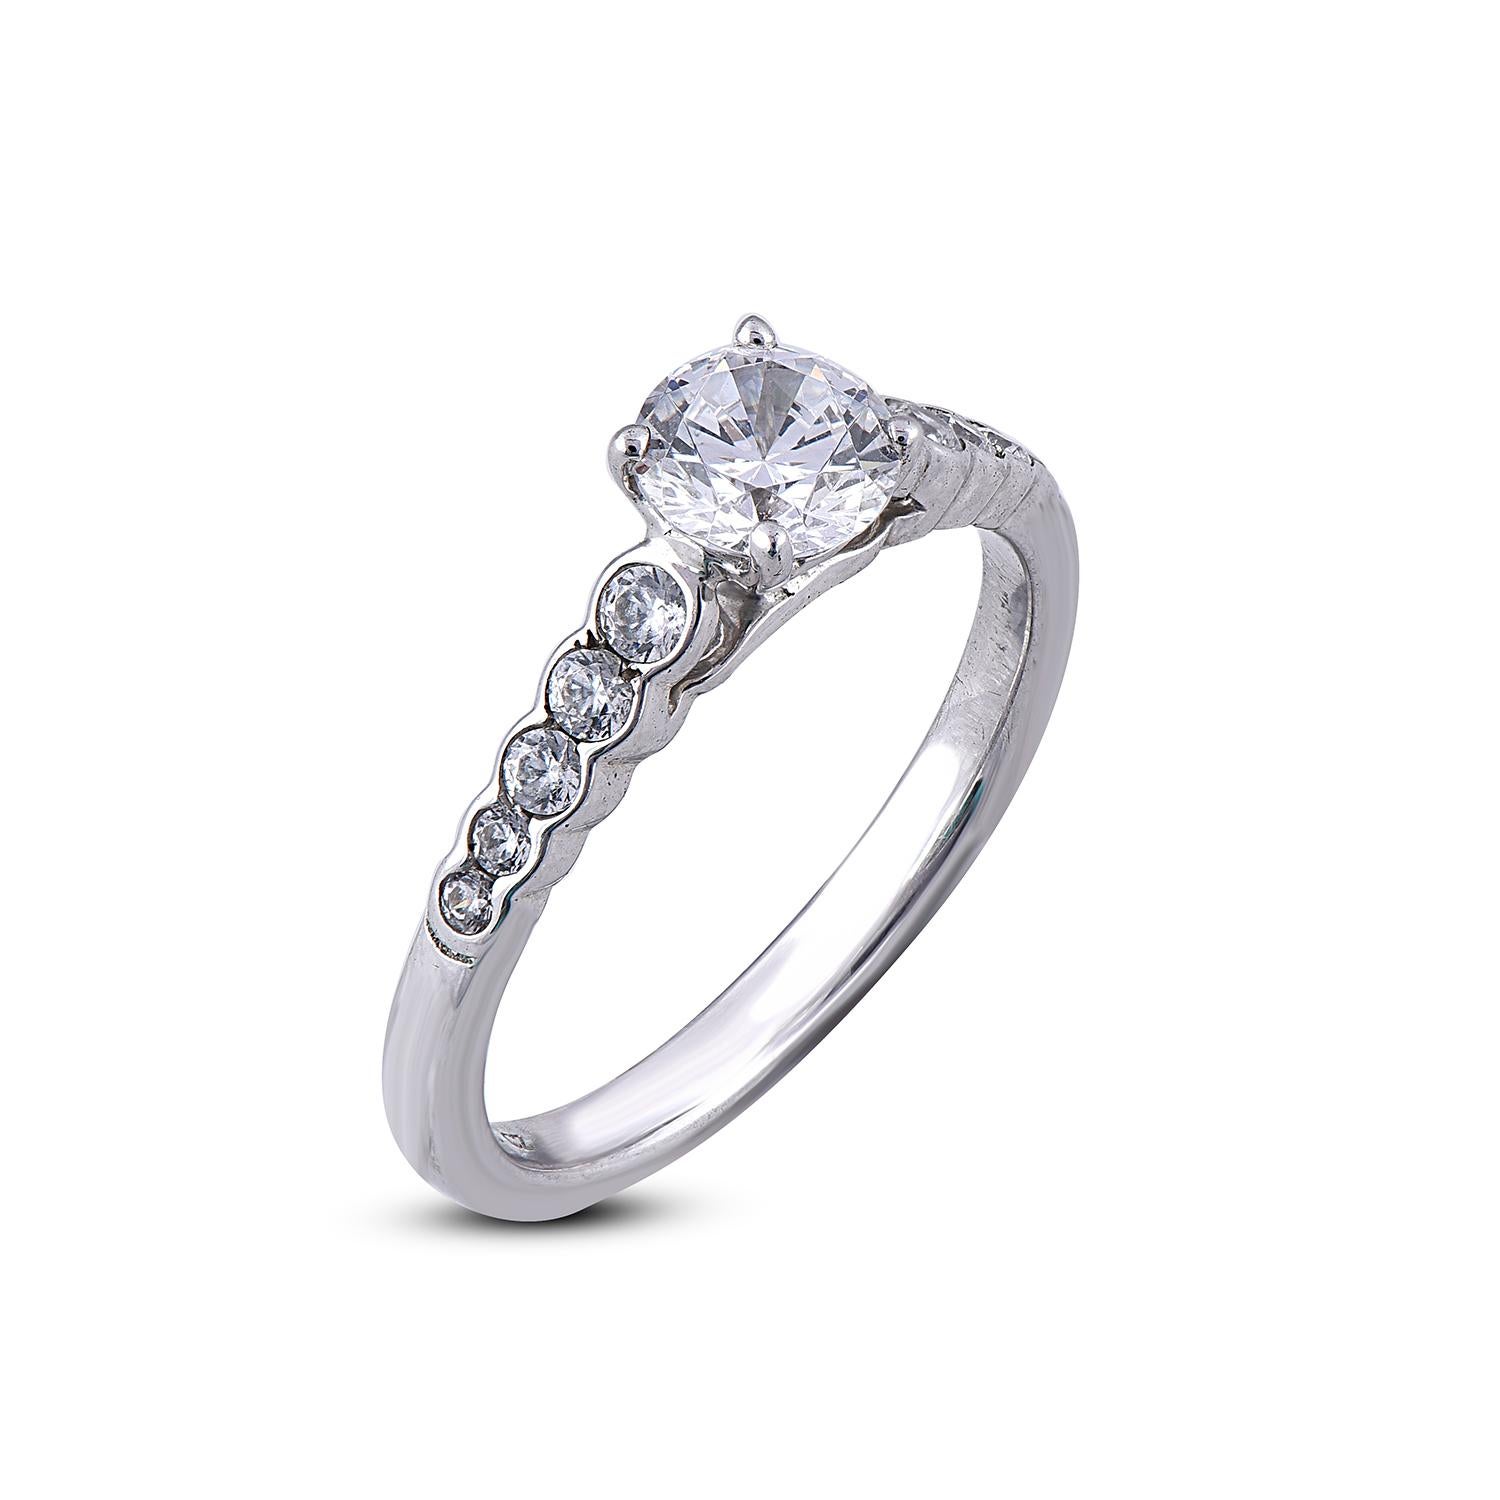 A touch of love, a touch of grace and a symbol of your love, this diamond wedding ring features 0.75 ct centre stone and 0.25 ct round diamond on shank set in prong and channel setting and shines with 11 round diamond in G-H color SI1-2 clarity. a